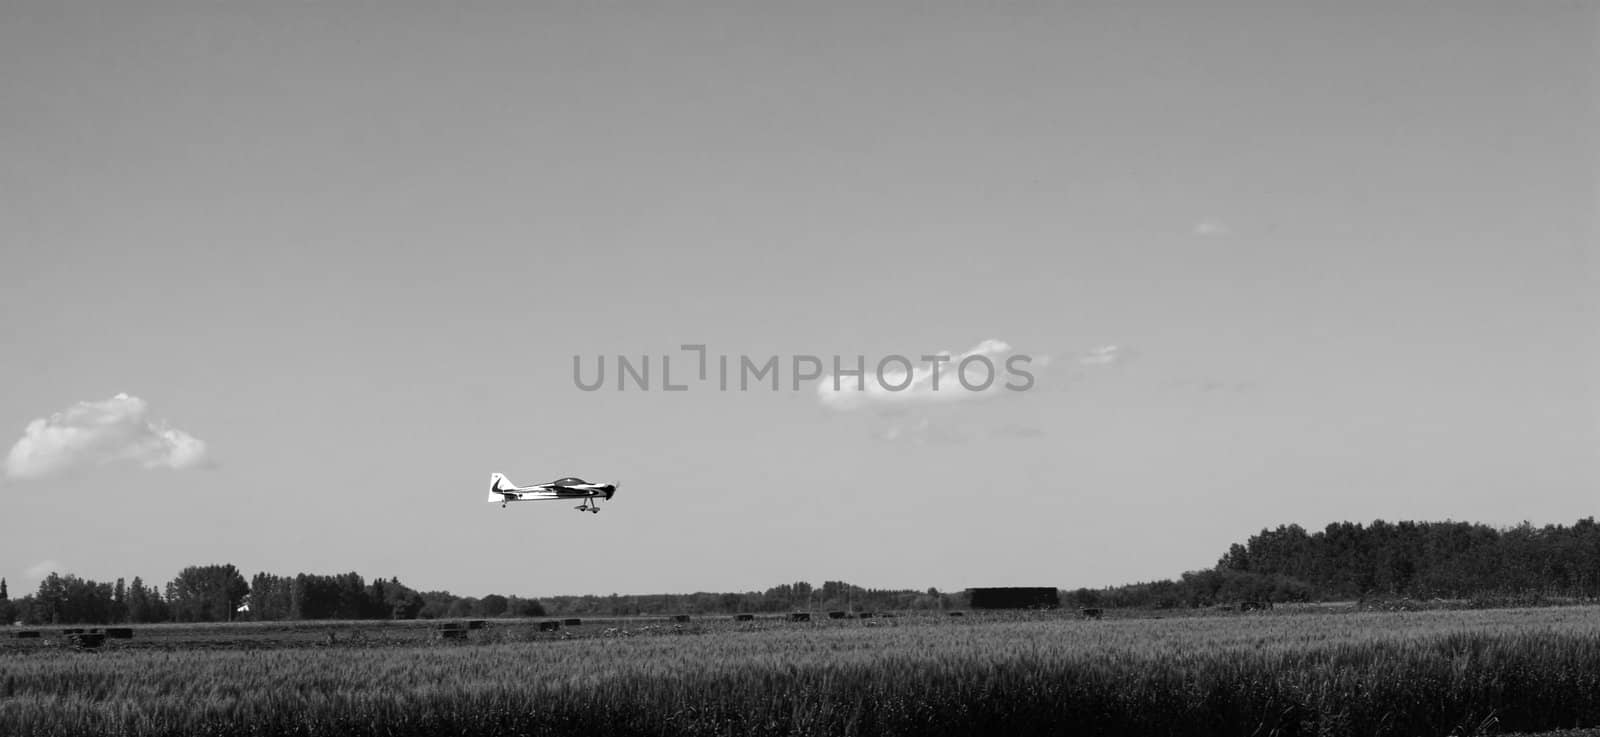 A small remote controlled plane landing in a field